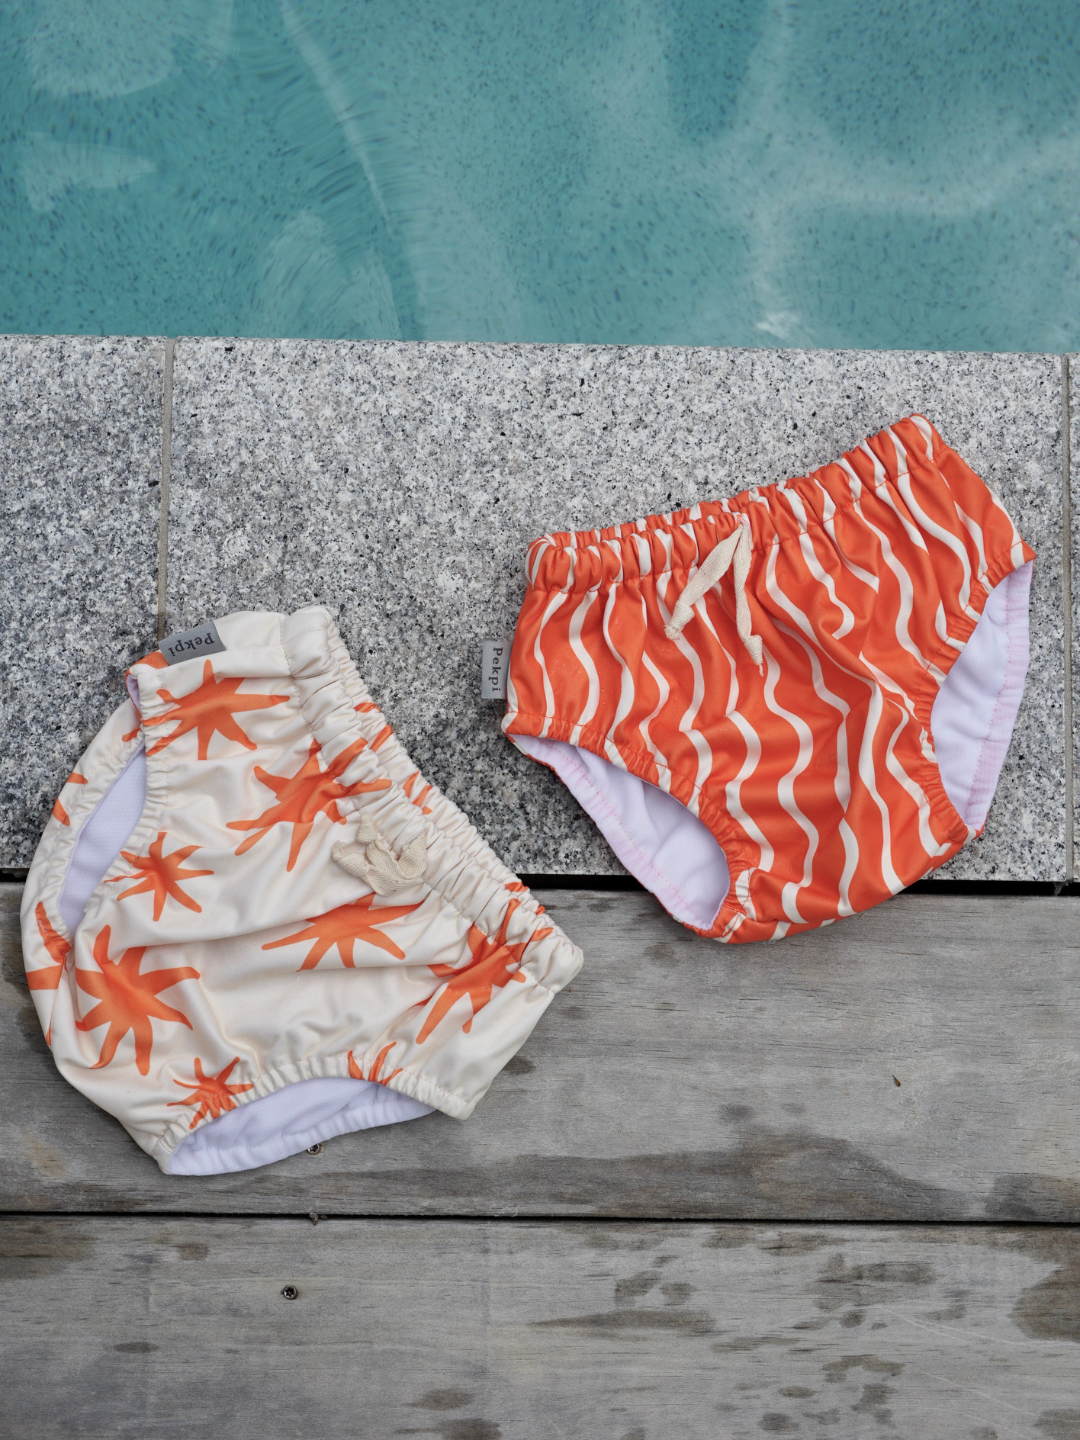 The front view of the swim diaper with an elastic waist with a tie and elastic leg holes. The diaper is a cream color with orange stars shapes all over. It's laid on the ground next to a pool with the Spaghetti Swim Diaper.